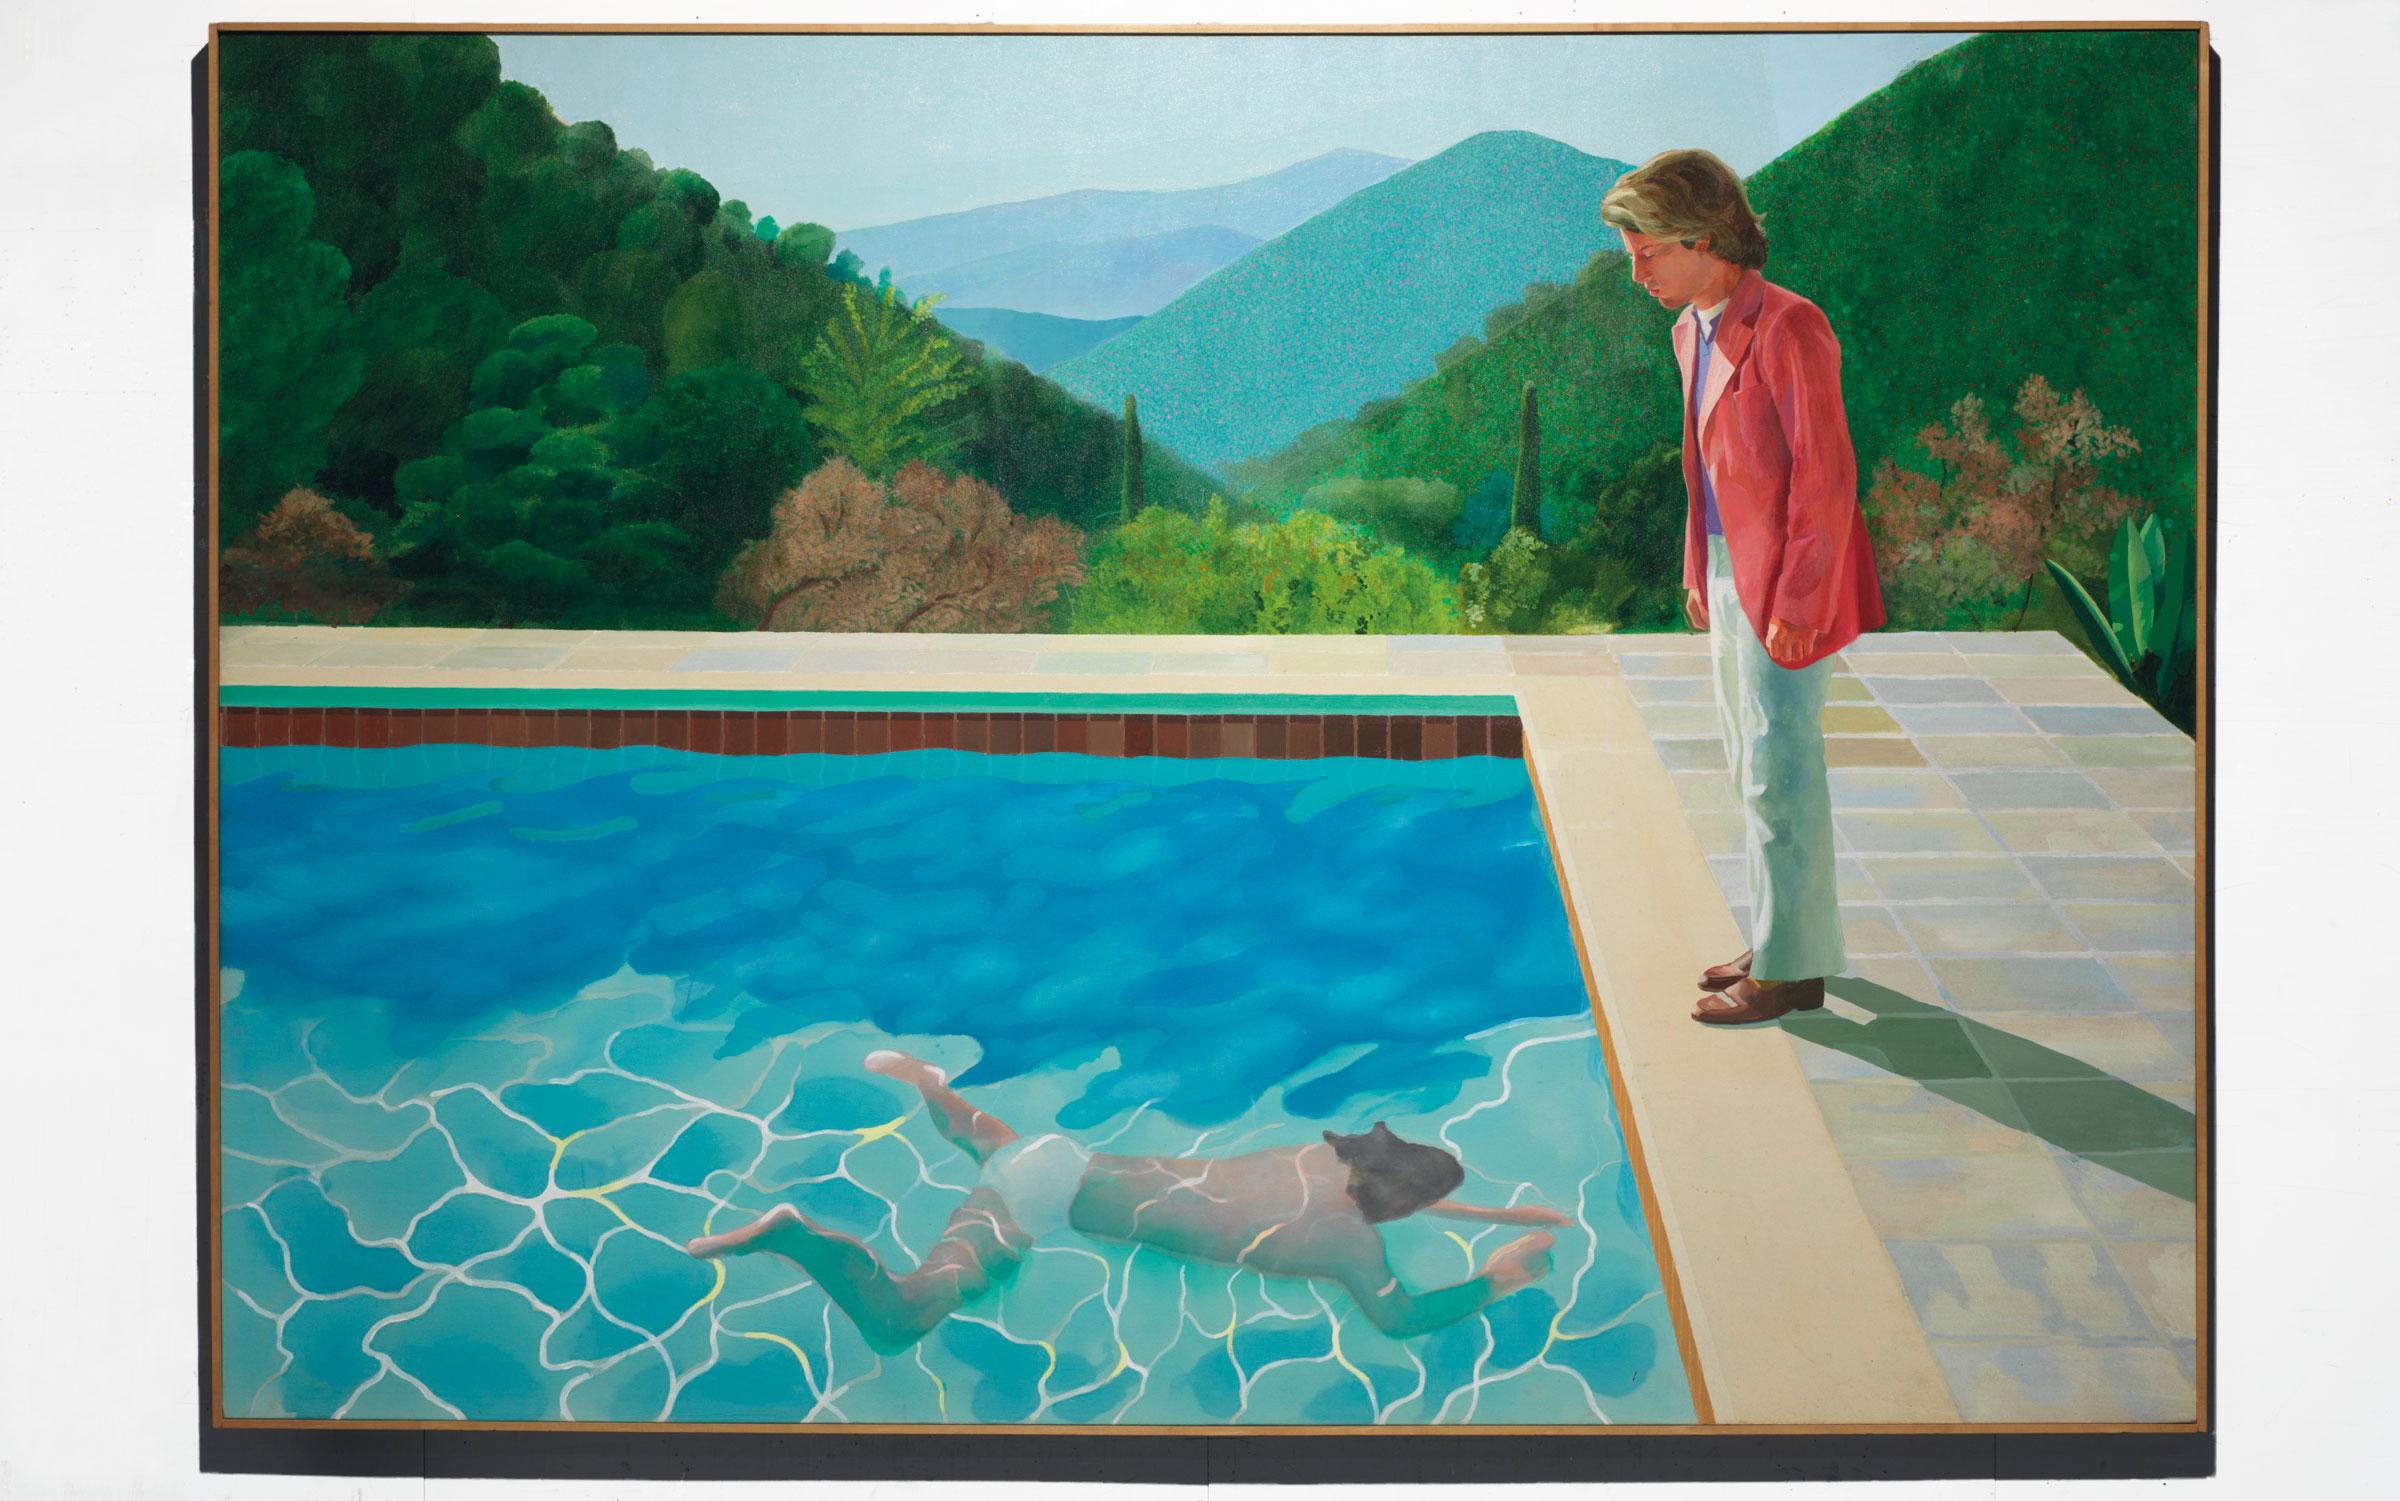 Hockney's Portrait of an Artist (Pool with Two Figures)